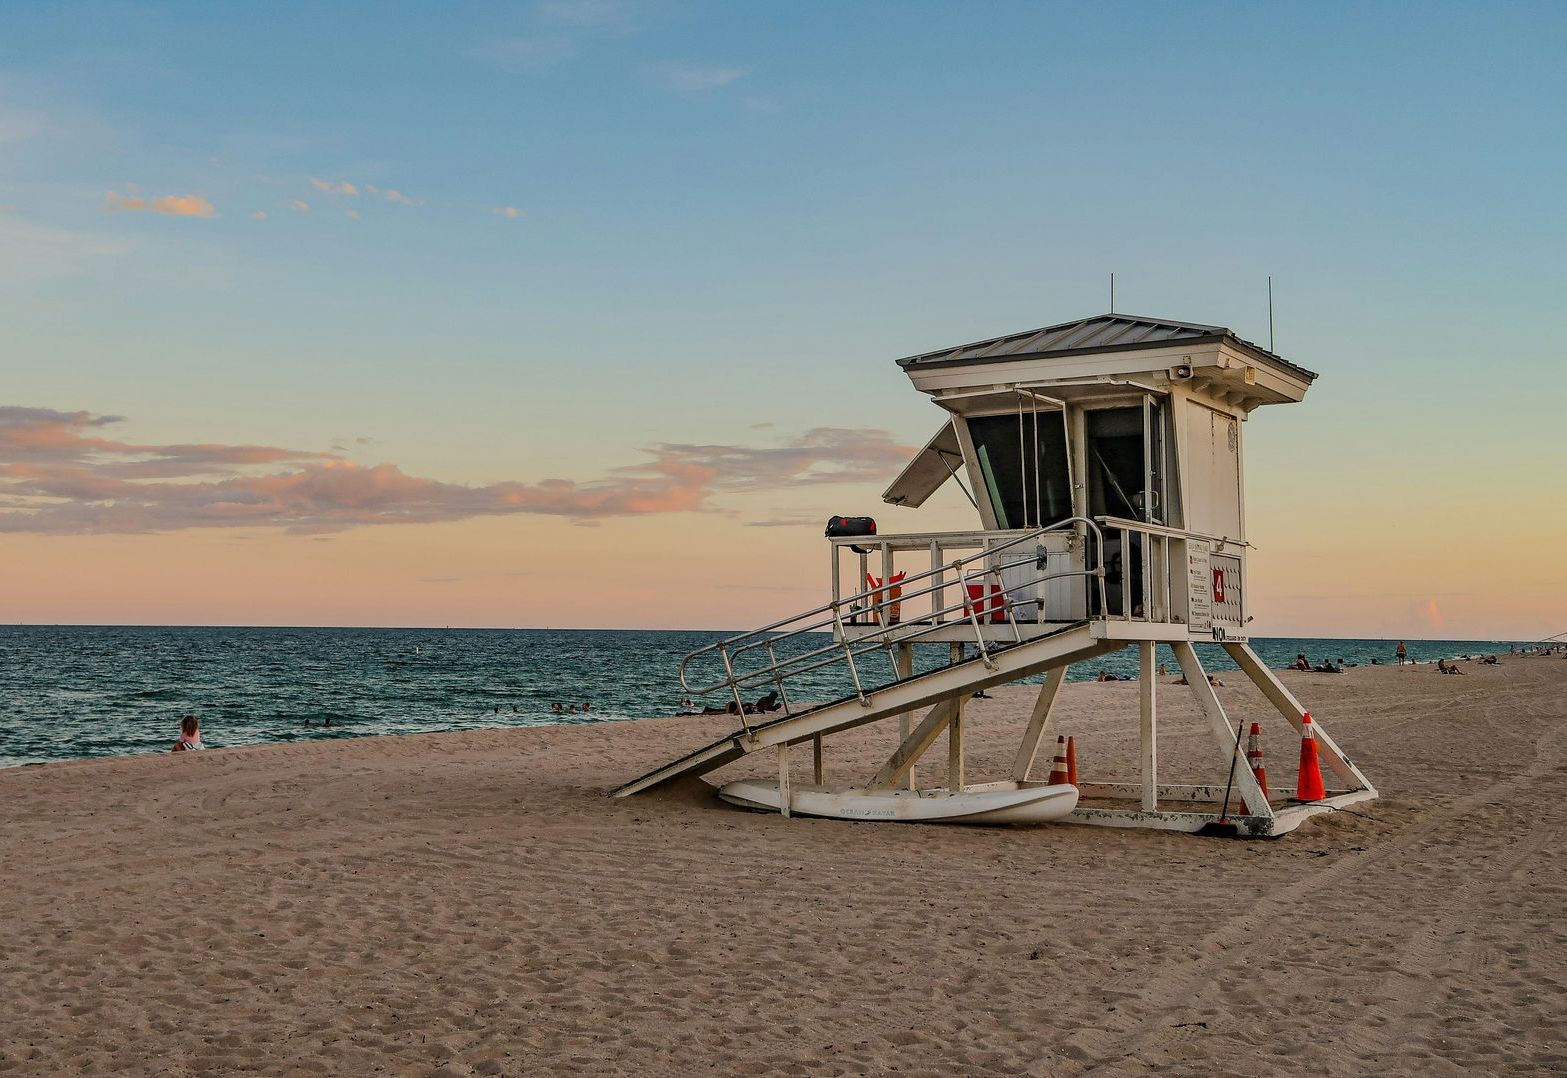 A lifeguard tower is sitting on the beach near the ocean.